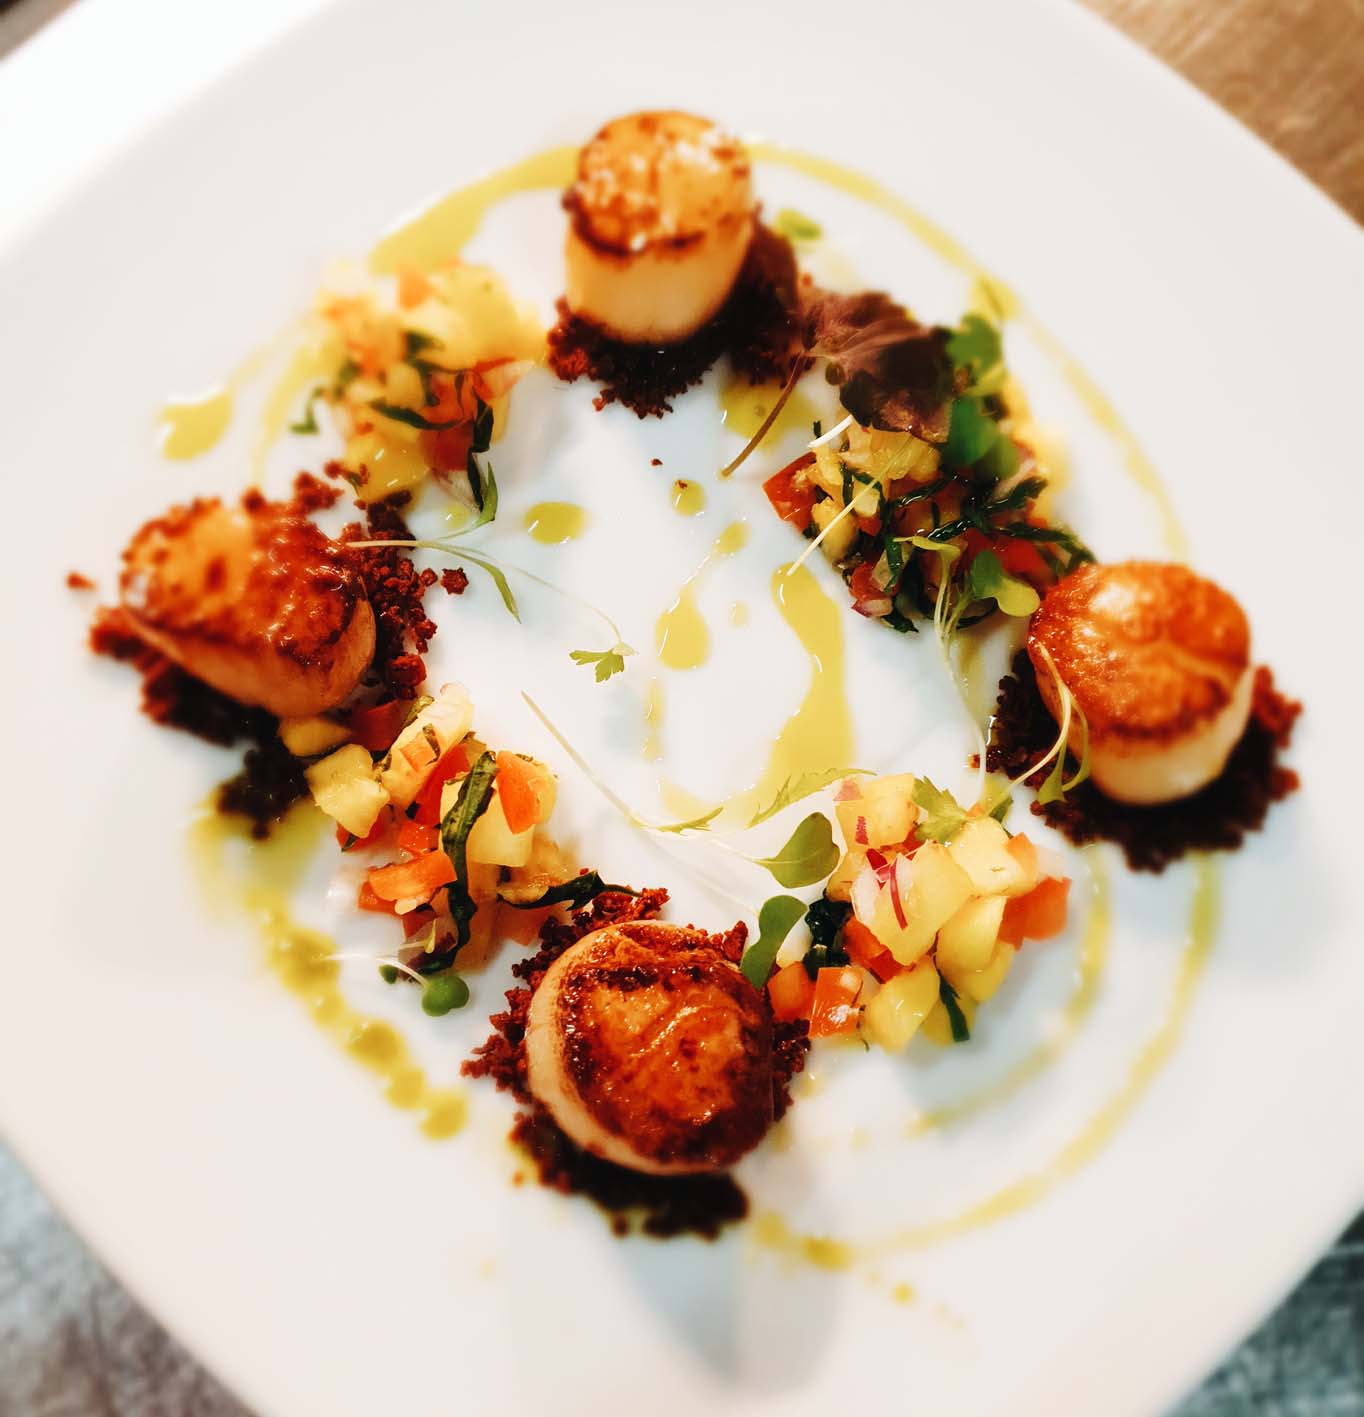 Pan seared Hervey Bay scallops on a bed of chorizo crumb with pineapple salsa and basil oil.